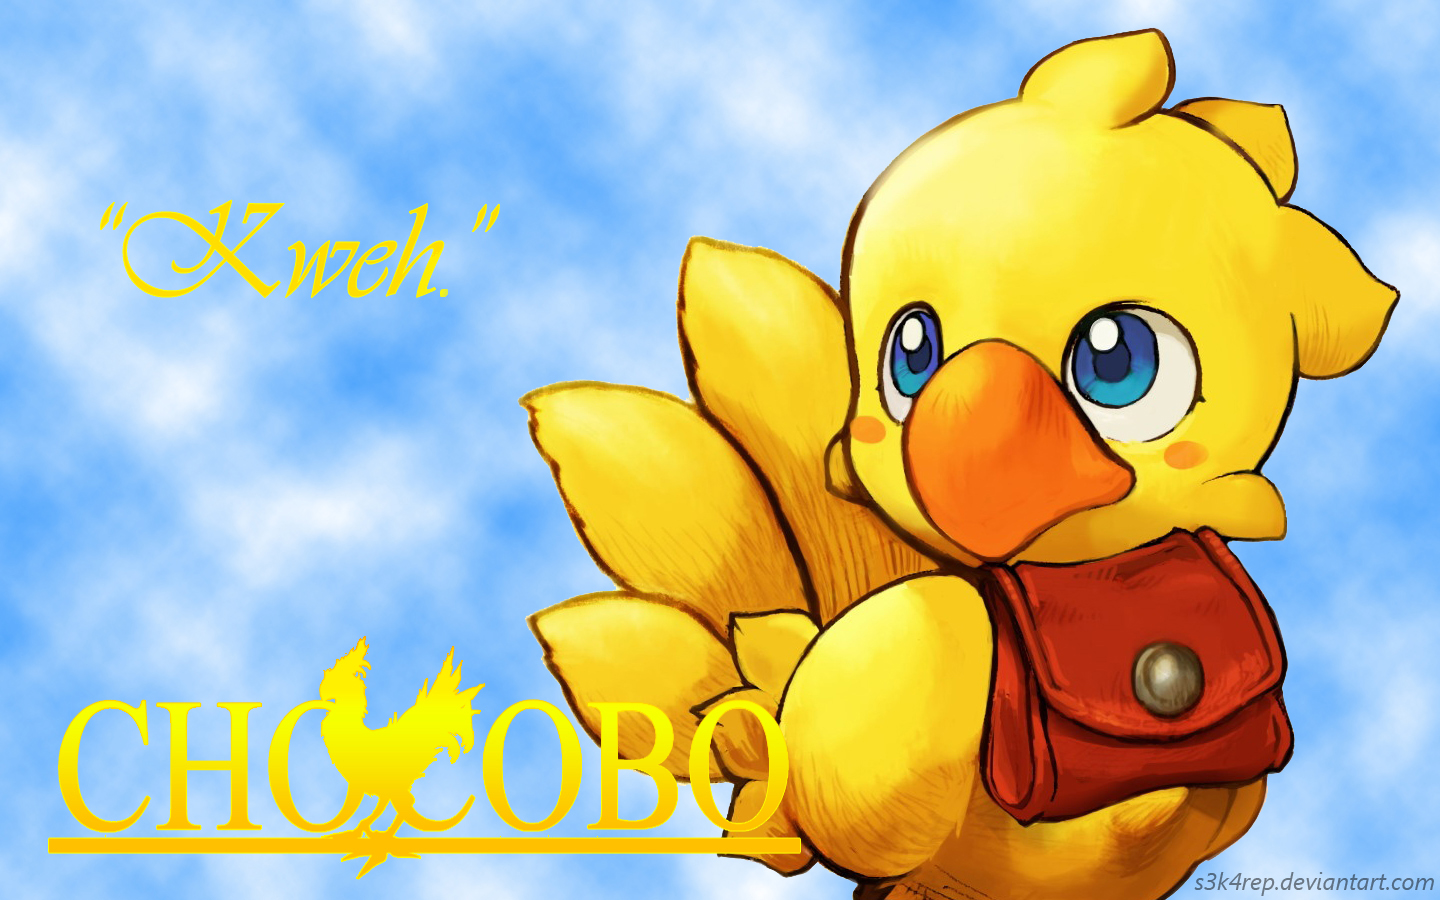 chocobo-s-dungeon-2-details-launchbox-games-database